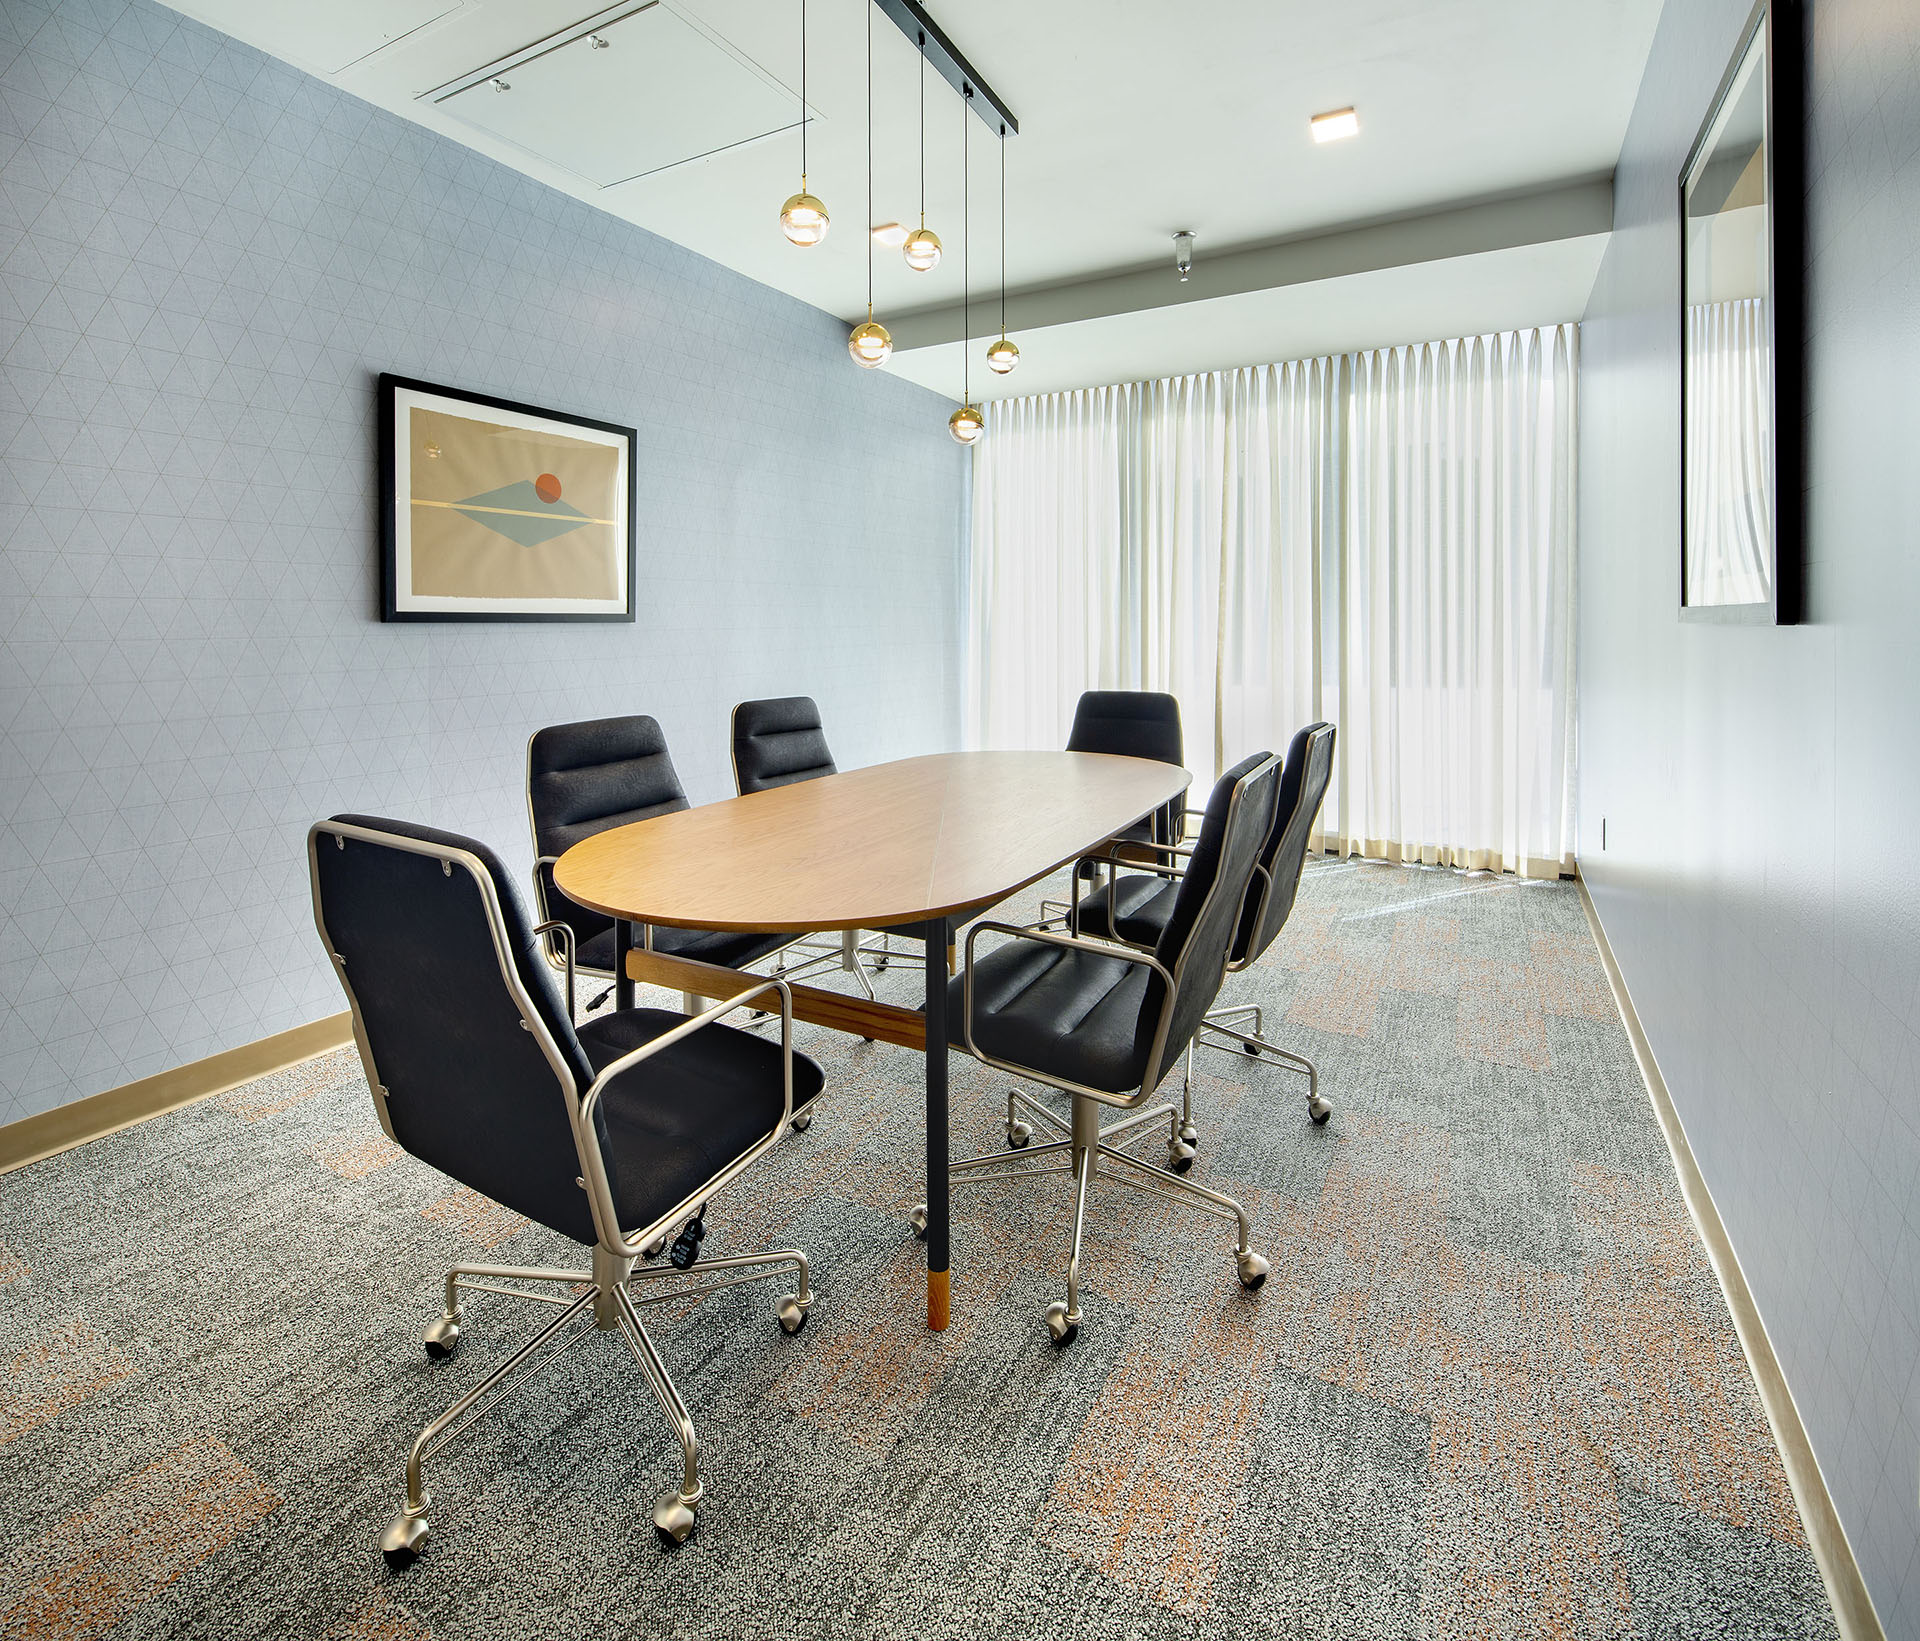 Crosby Apartments resident amenity - Meeting room with conference table. 